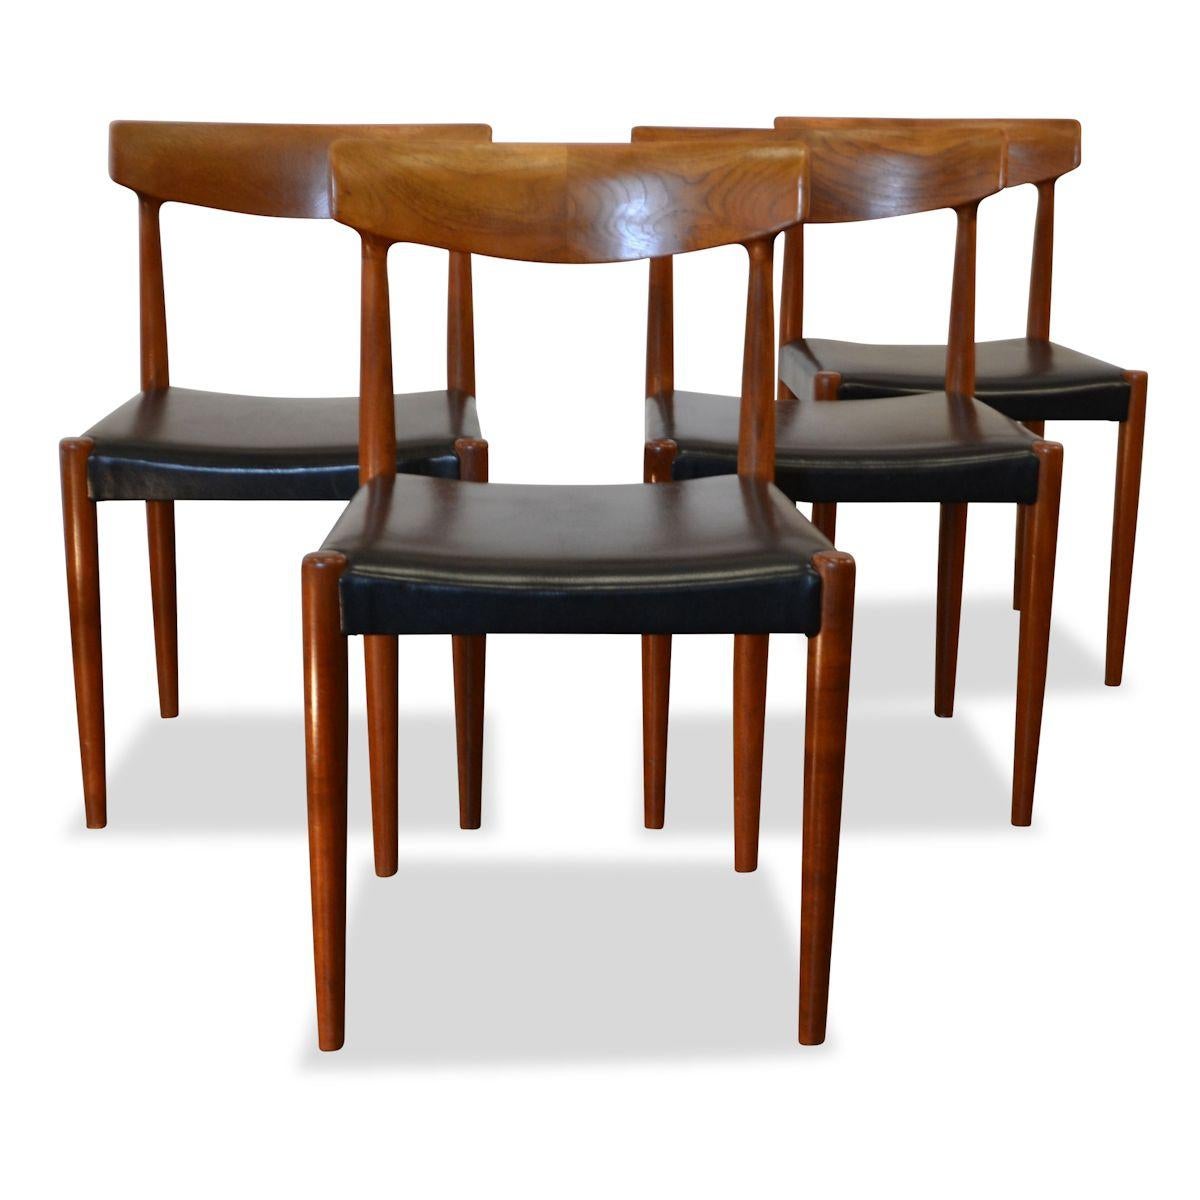 20th Century Vintage Knud Faerch Teak Dining Chairs, Set of 4 For Sale